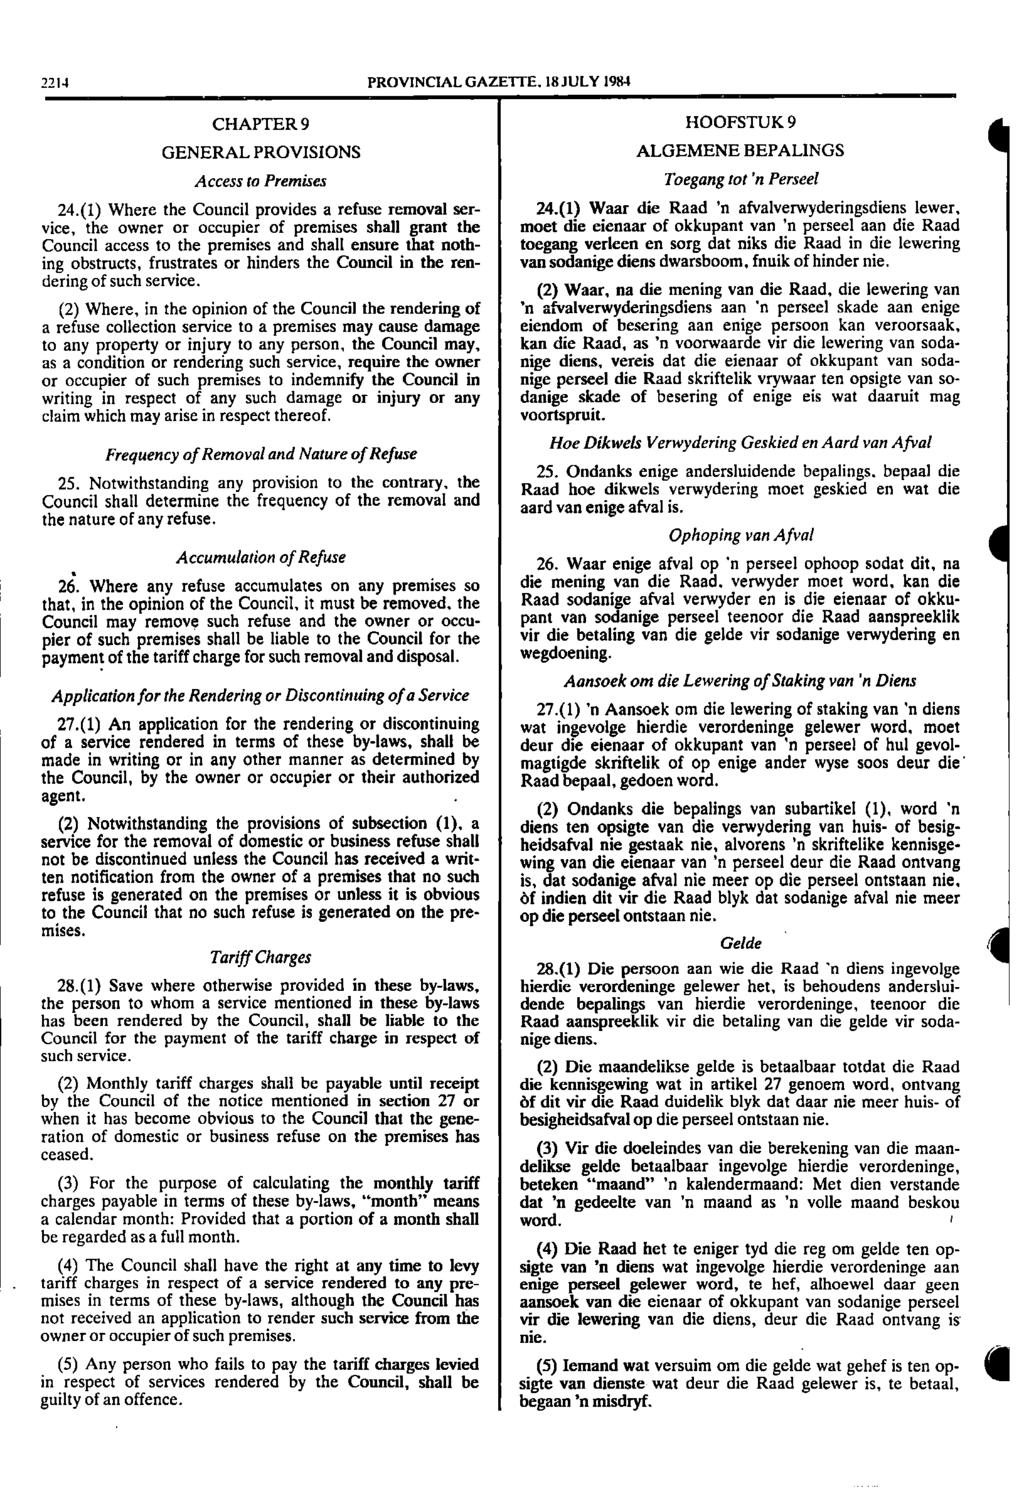 2214 PROVINCIAL GAZETTE. 18 JULY 1984 CHAPTER 9 HOOFSTUK 9 GENERAL PROVISIONS Access to Premises ALGEMENE BEPALINGS Toegang tot 'n Perseel 24.(1) Where the Council provides a refuse removal ser 24.